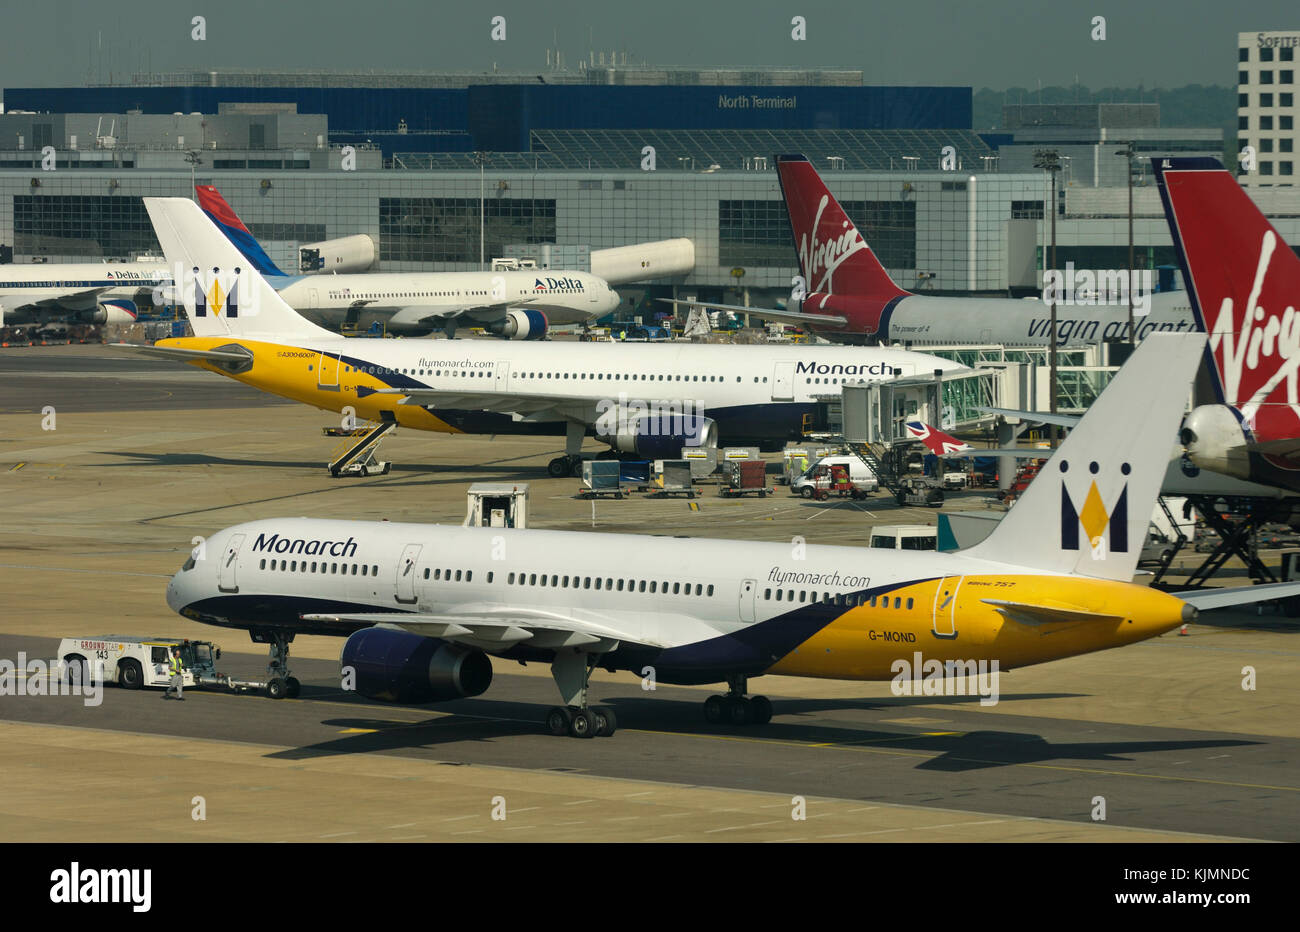 a Monarch Boeing 757-200 being towed by a tug with an Airbus A300, two Virgin Atlantic 747-400s and Delta Air Lines 767-300 parked at the terminal and Stock Photo